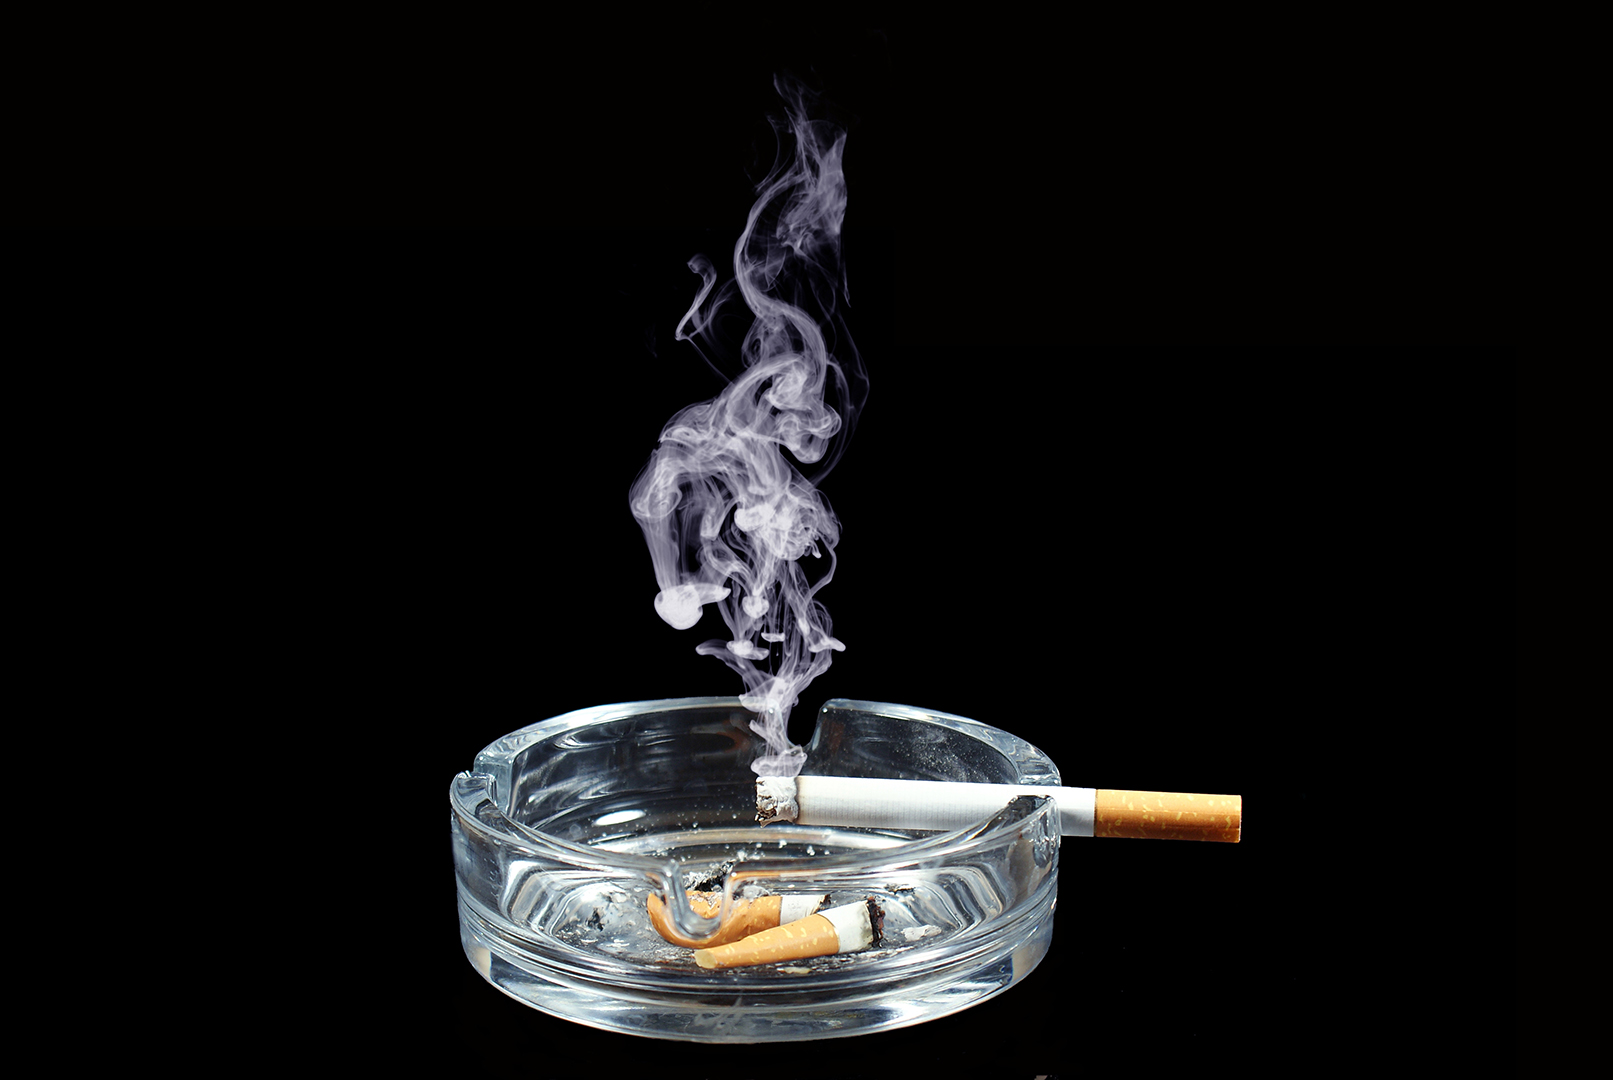 Cigarette in an ash tray.